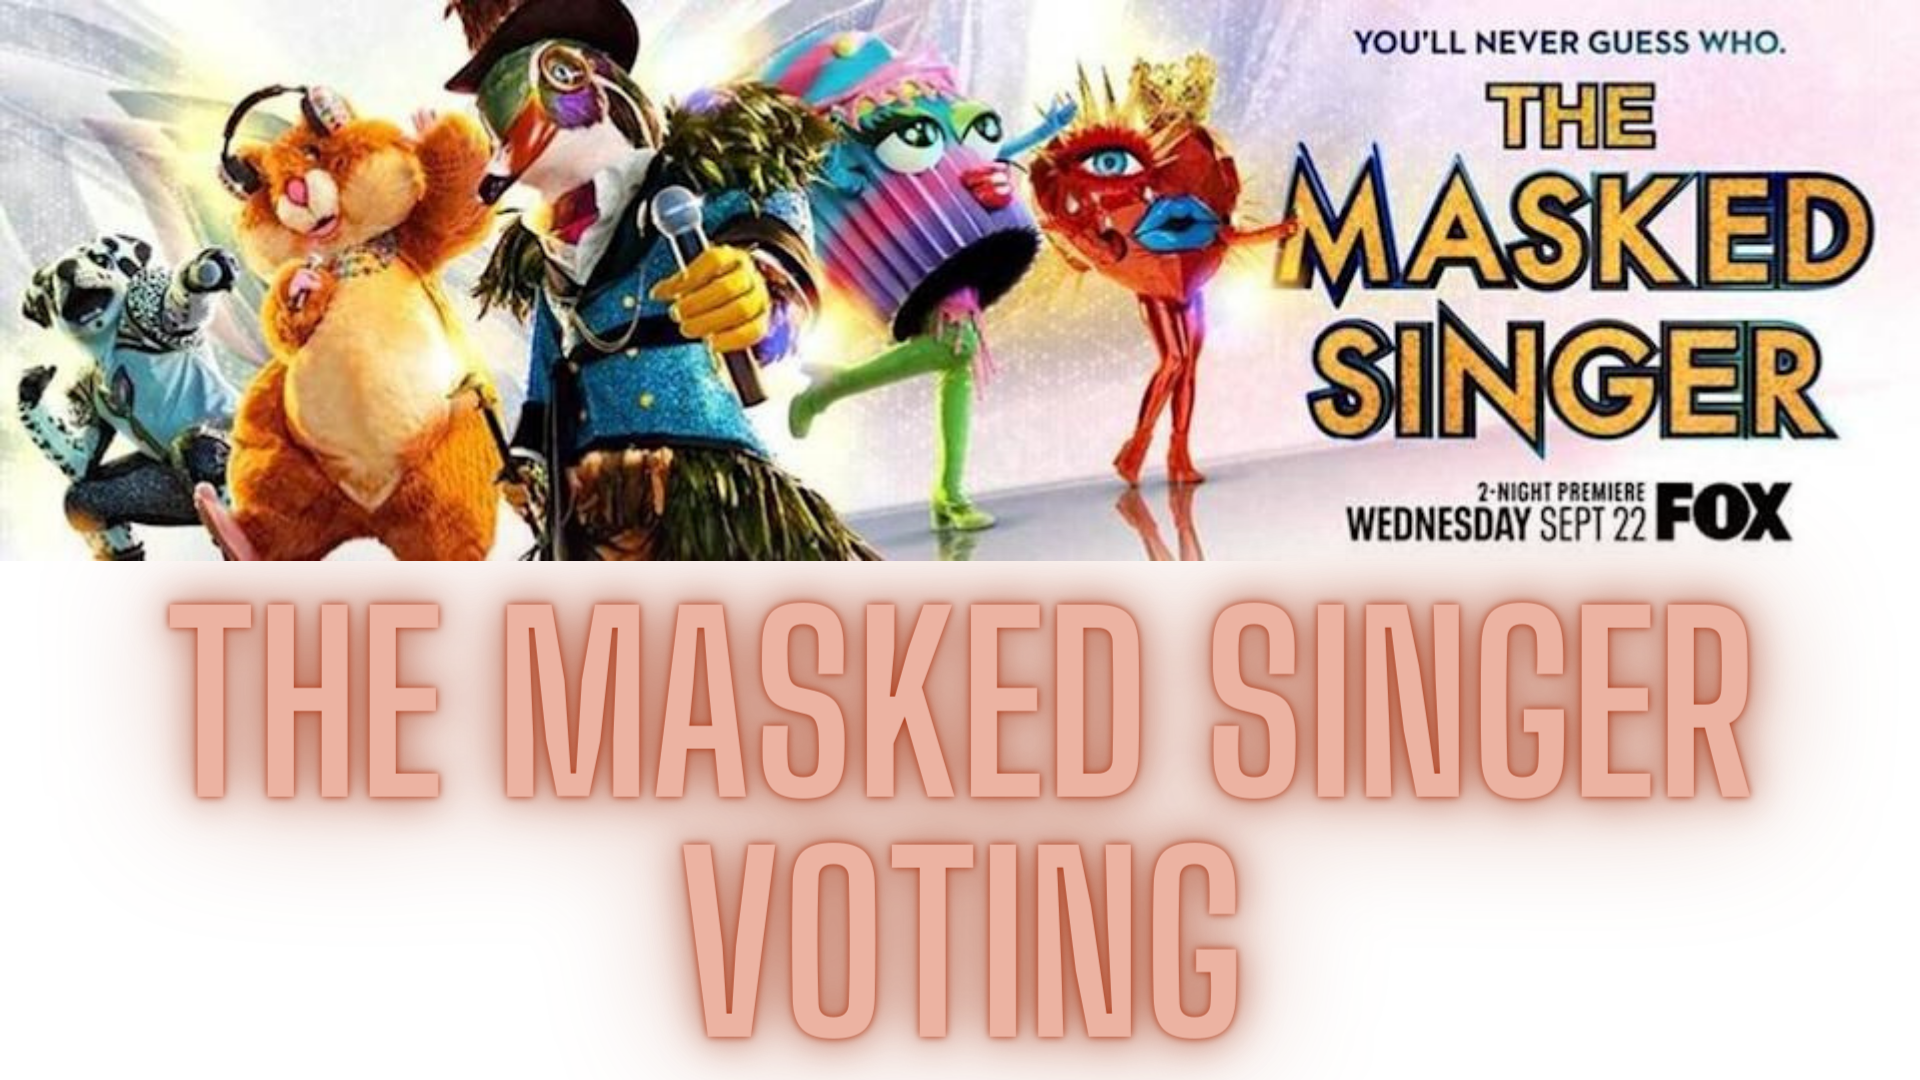 22 How To Vote On Masked Singer
 10/2022